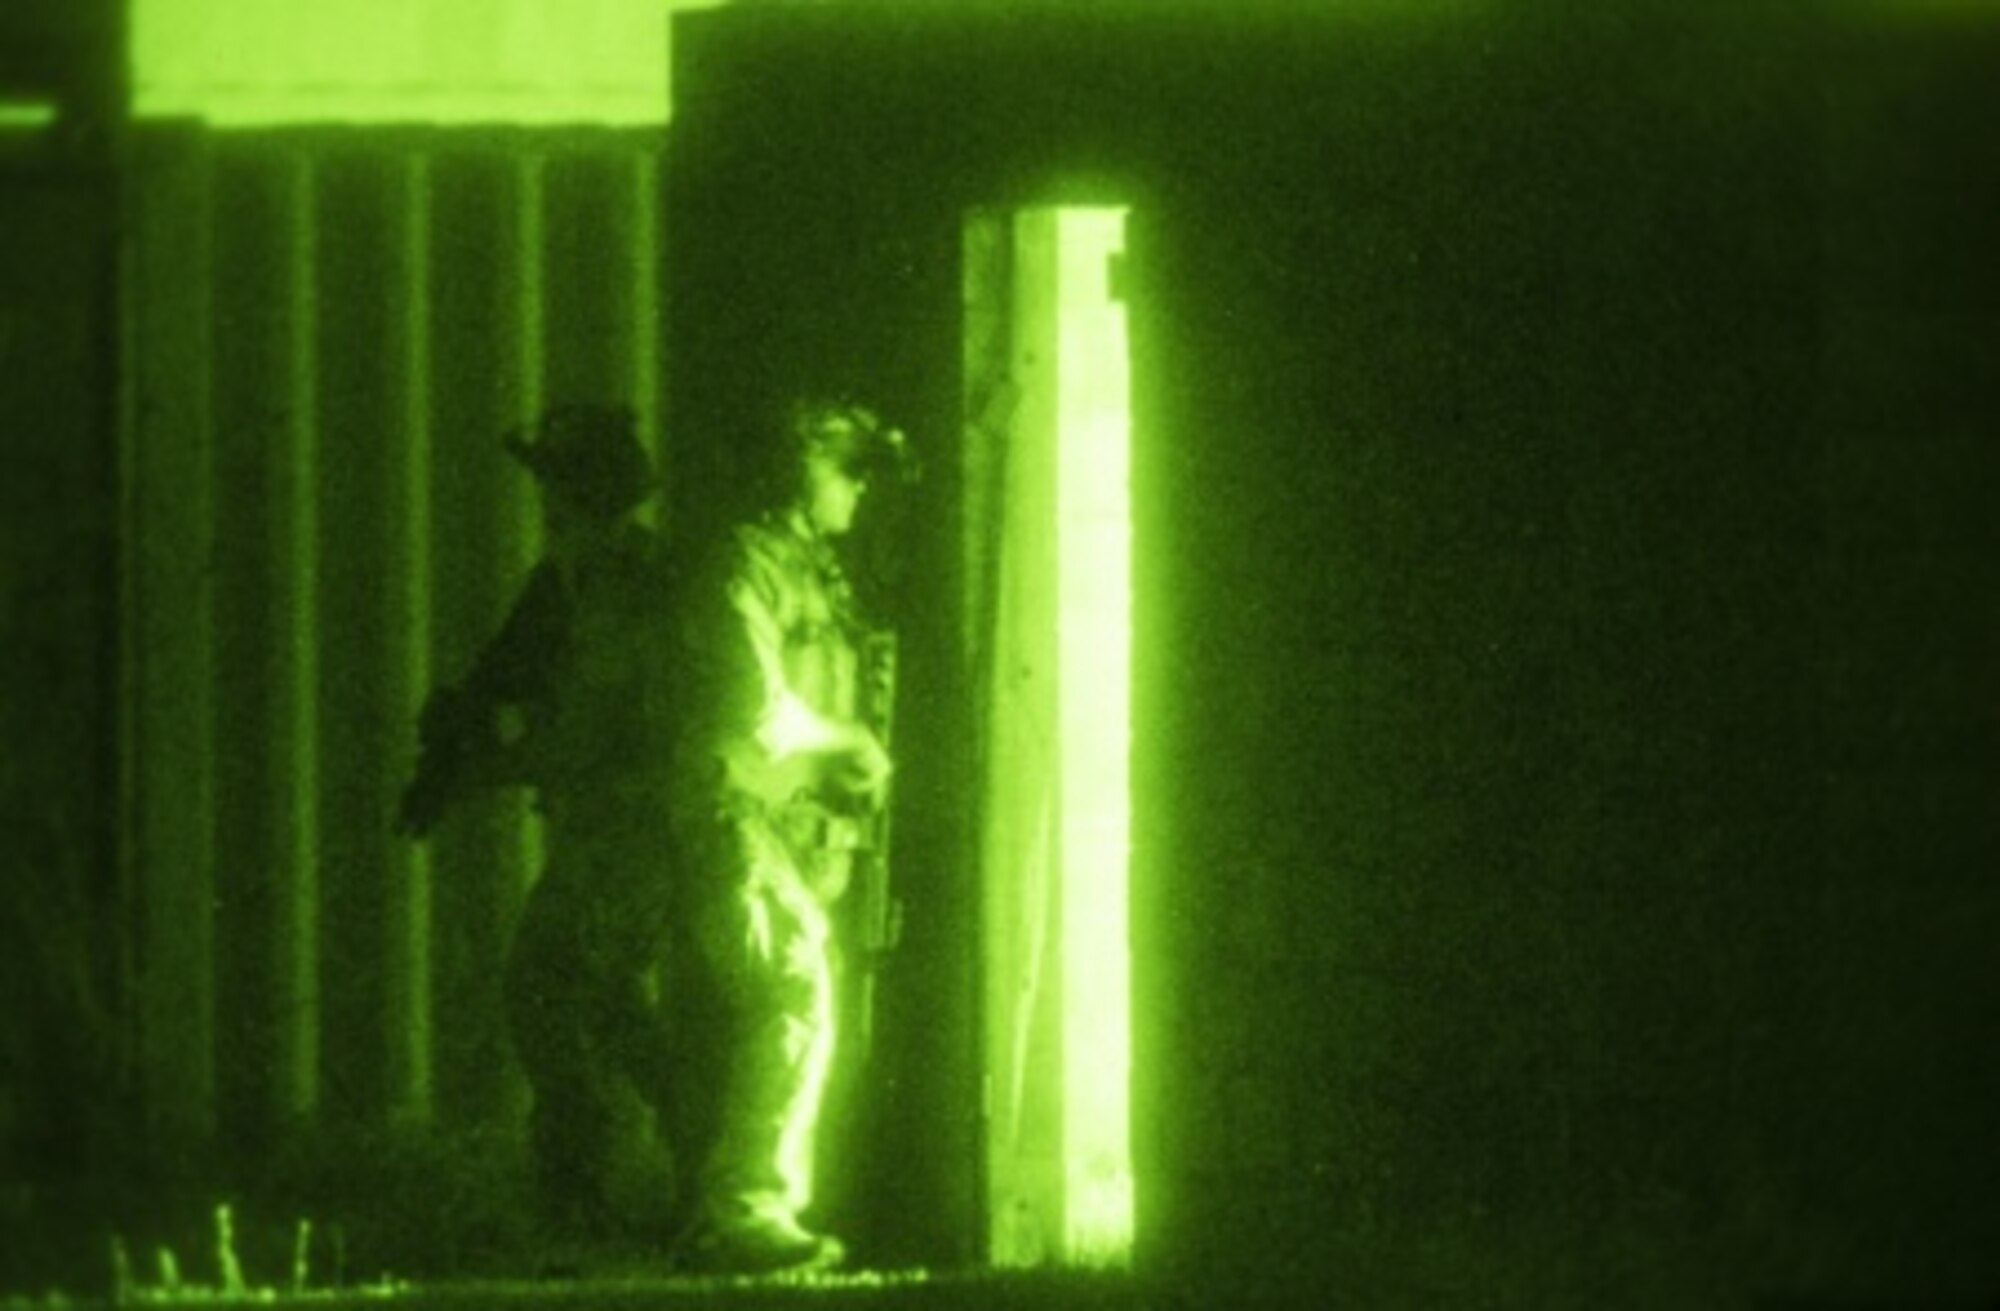 Navy SEAL team members prepare to breach a doorway during an Emerald Warrior close quarters combat exercise near Hurlburt Field, Fla., April 28, 2015. Emerald Warrior is the Defense Department's only irregular warfare exercise, allowing joint and combined partners to train together and prepare for real-world contingency operations. (U.S. Air Force photo/Senior Airman Cory D. Payne)